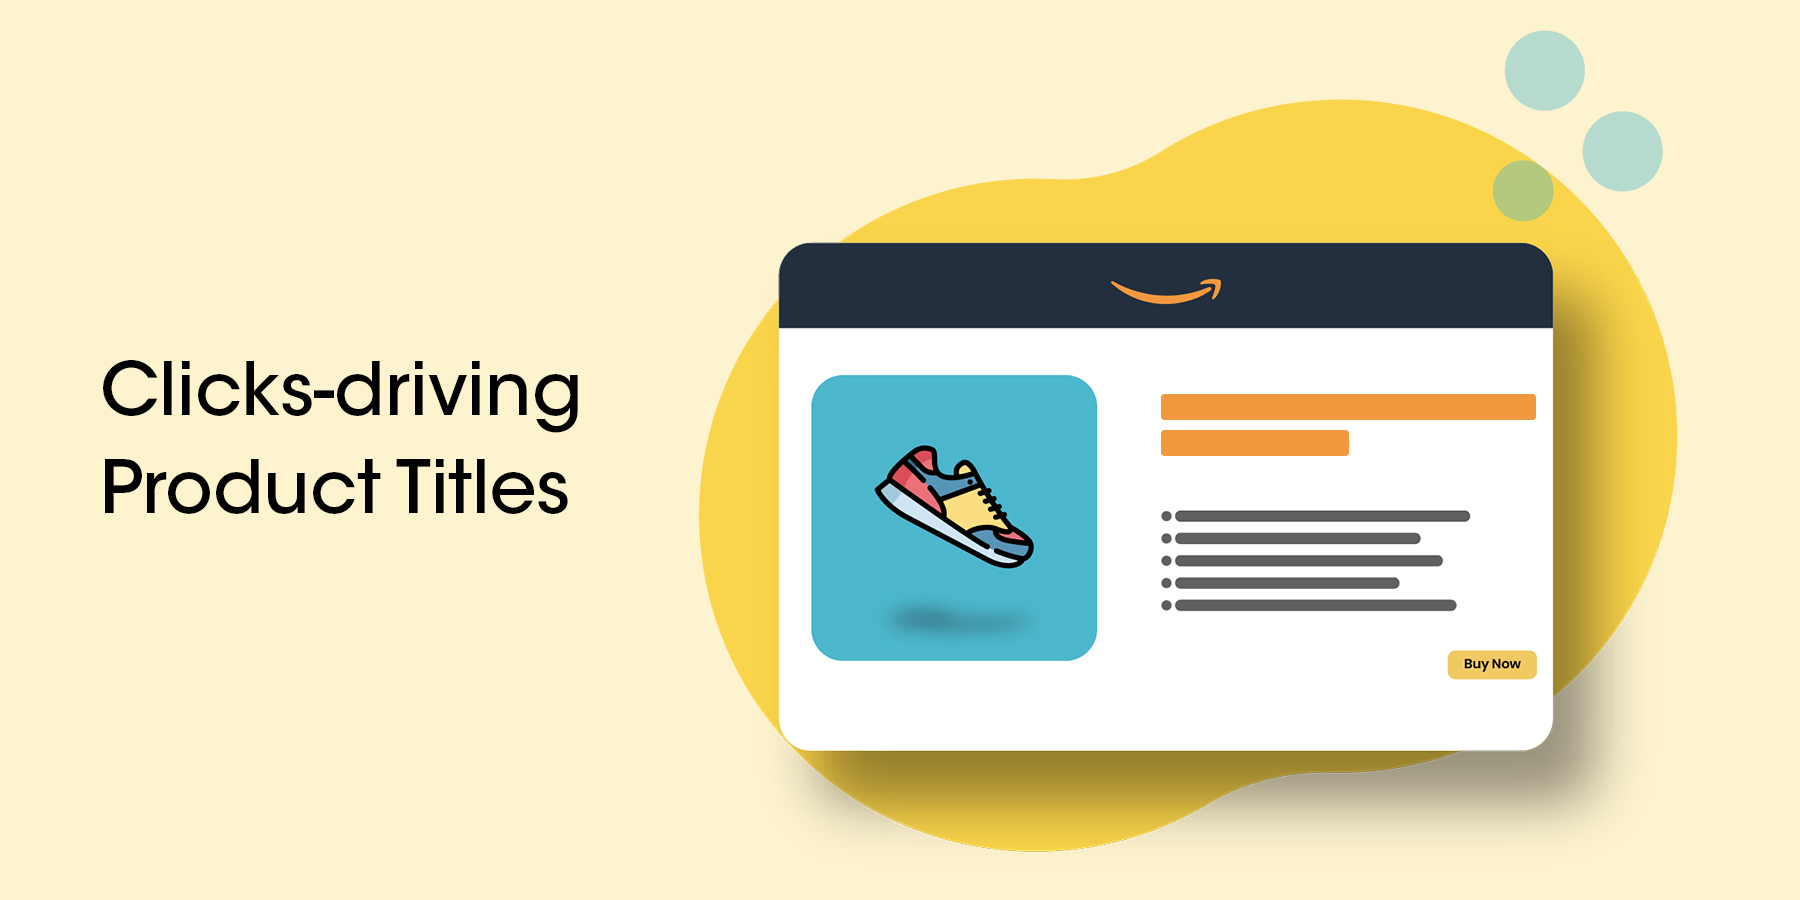 Tips To Write Amazon Product Titles That Drive Clicks